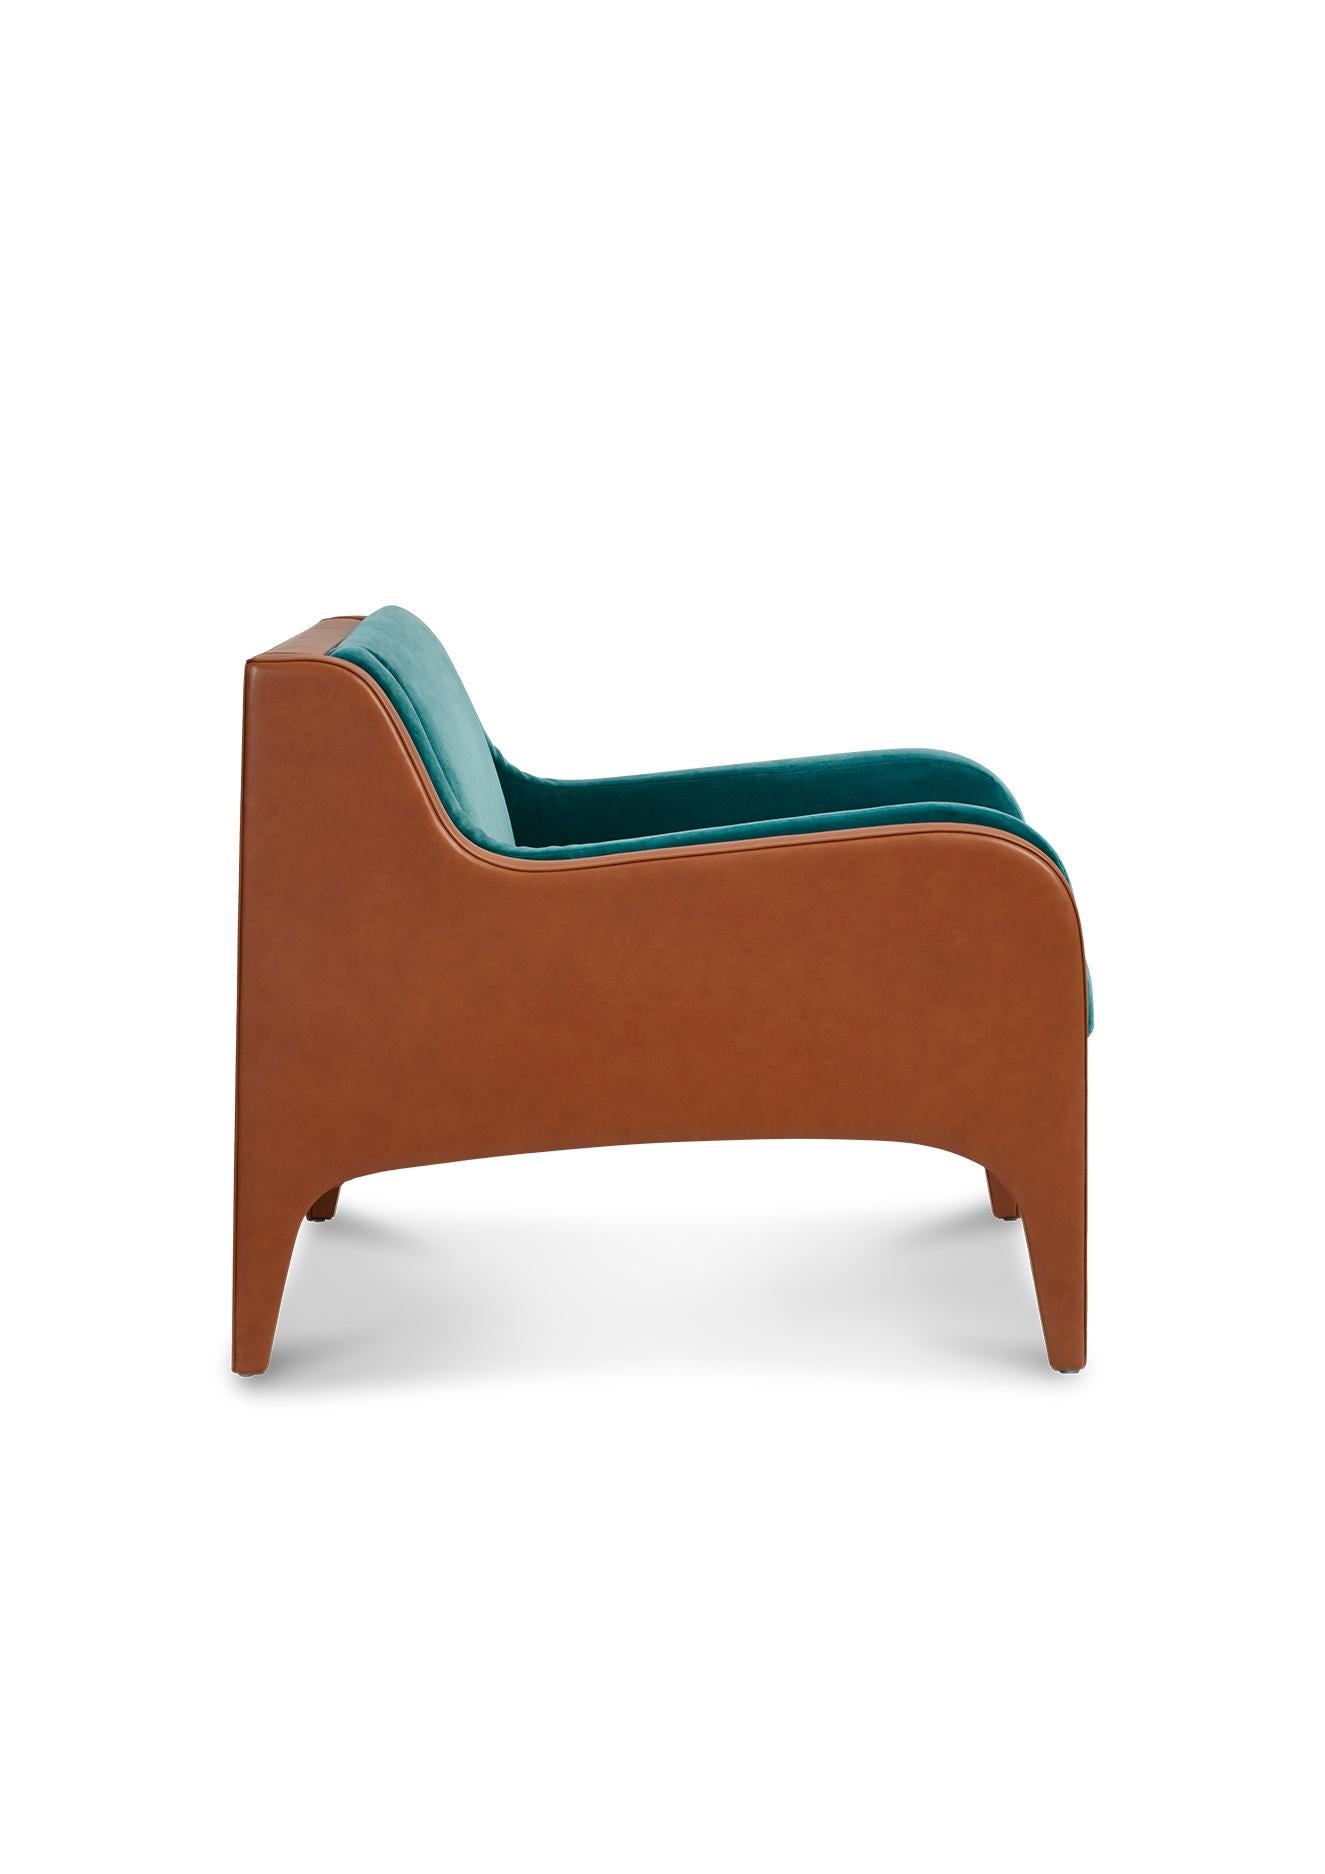 Armchair SEASON by Reda Amalou Design - Tabac Leather For Sale 4